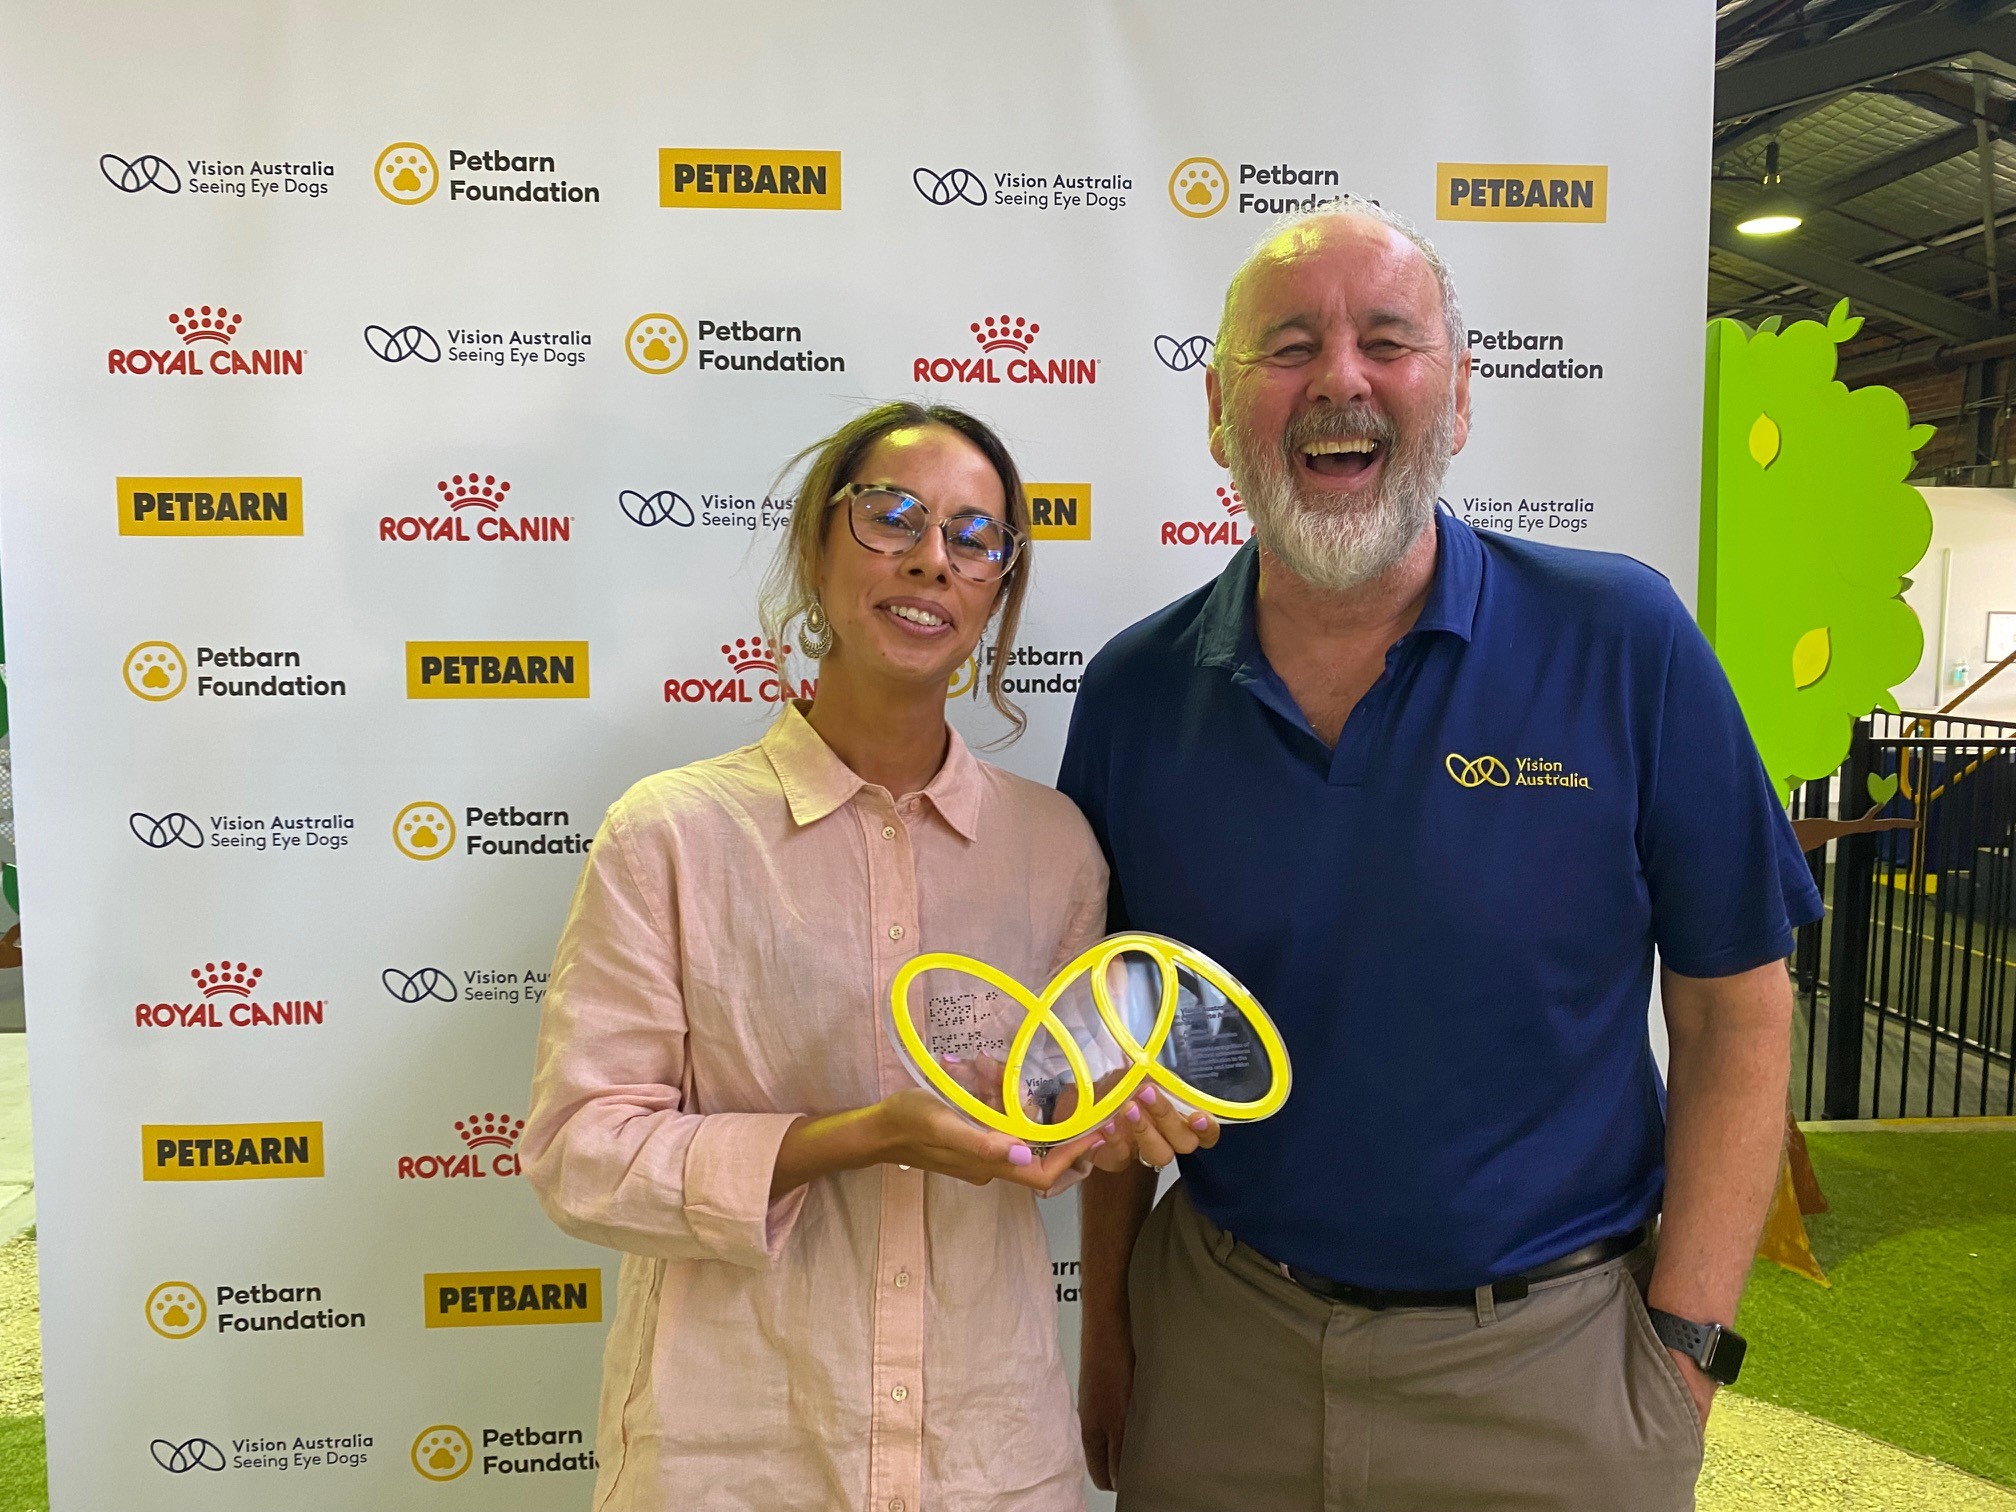 "Vision Australia CEO Ron Hooton and Petbarn Foundation manager Janelle Bloxsom smiling widely while Janelle holds the Vision Australia Award."